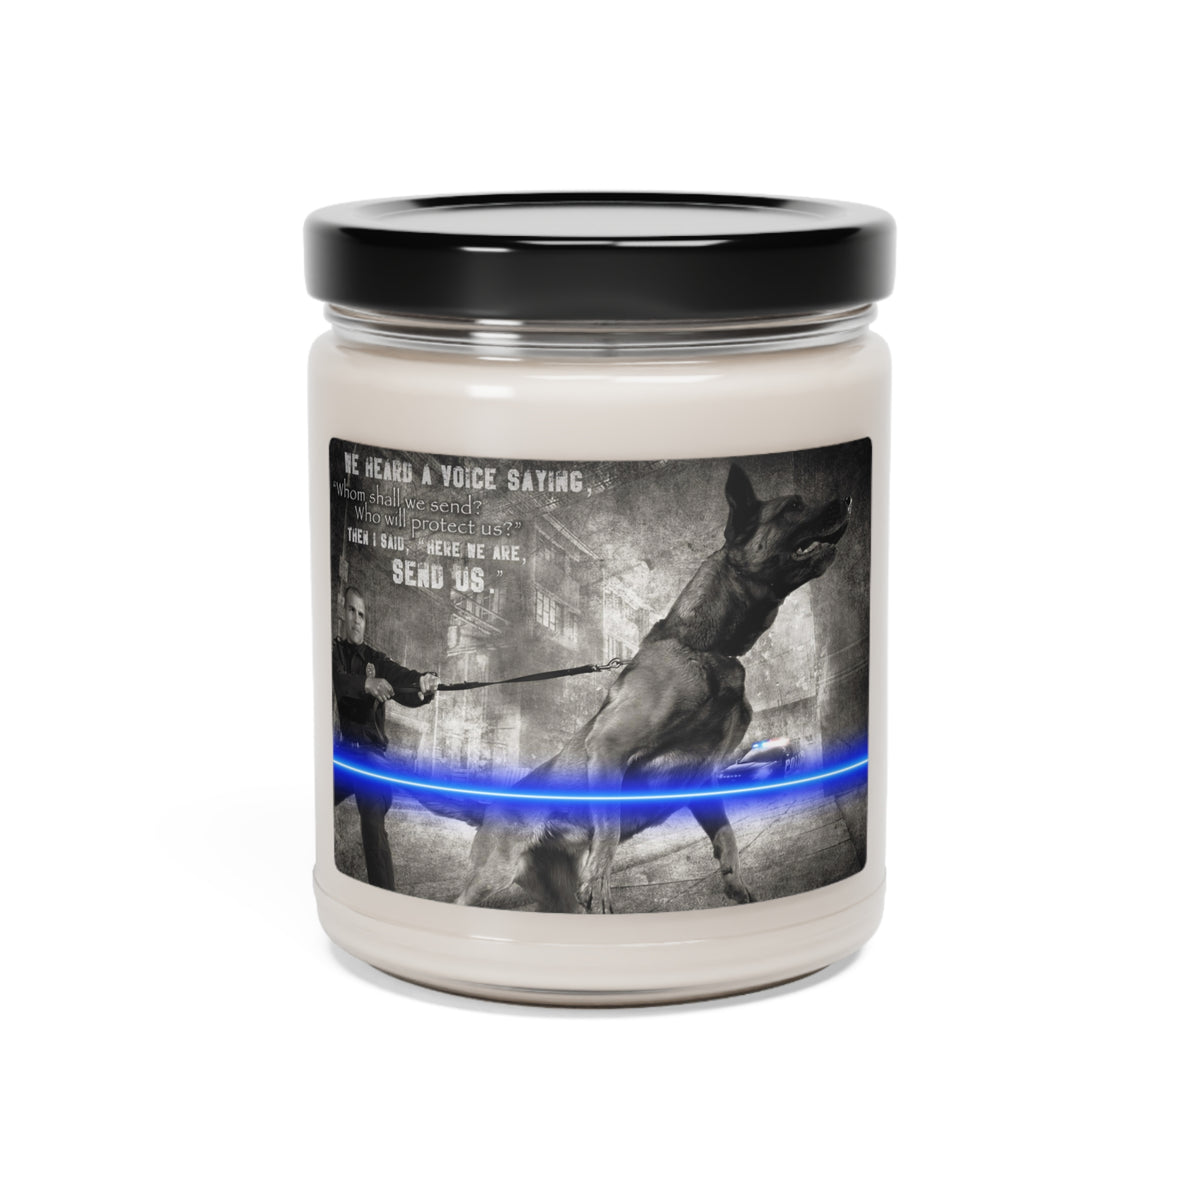 Send Me K9 Police 9oz Scented Soy Candle